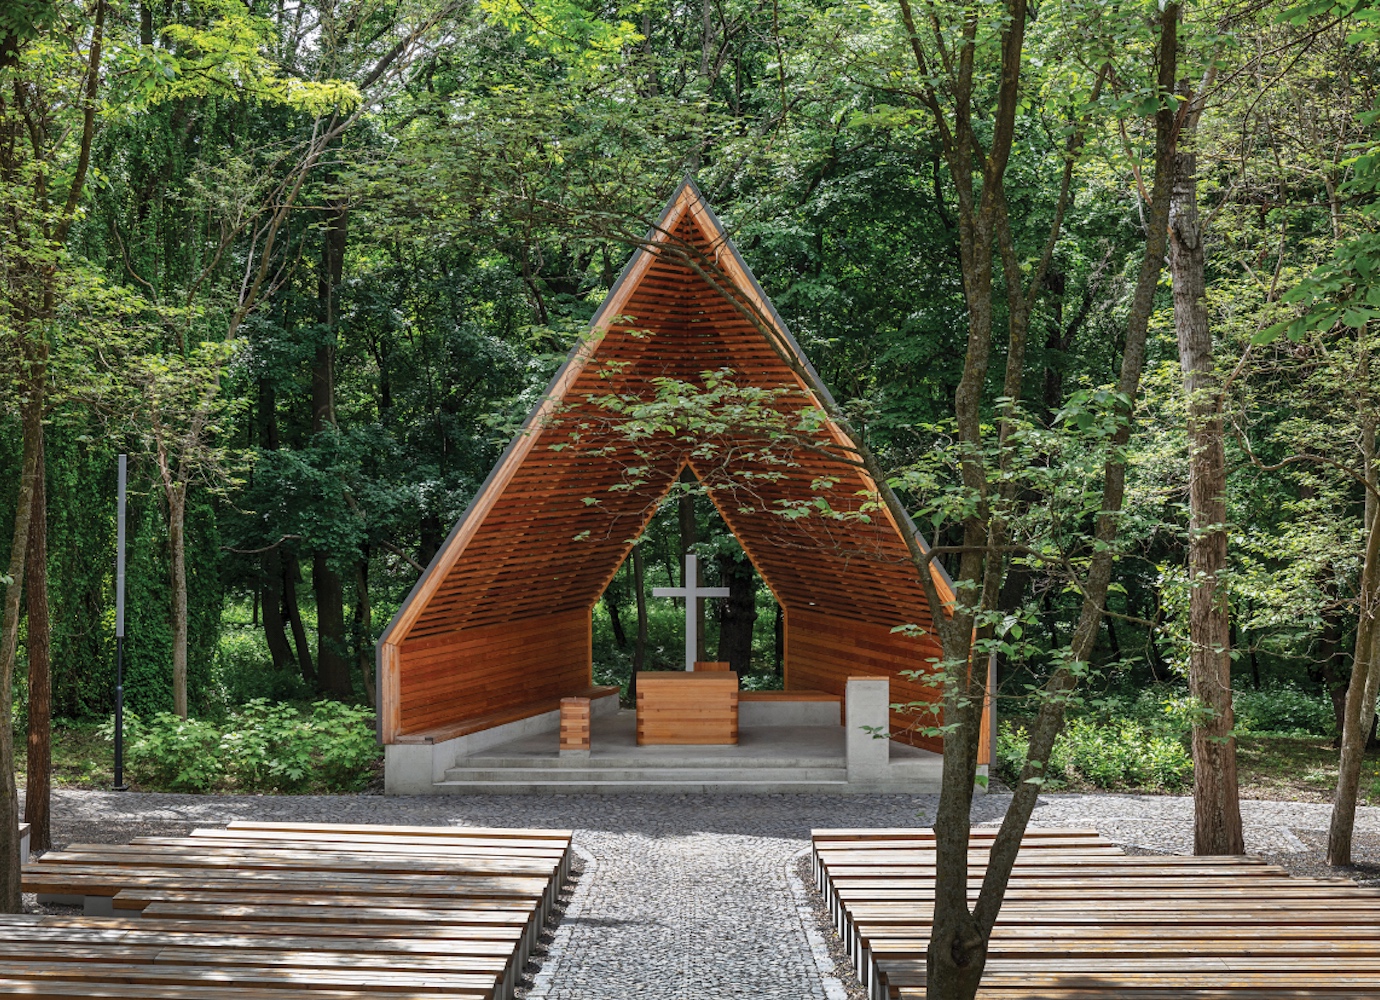 Hungarian architecture studio design modern open-air church made from a former Soviet monument plinth